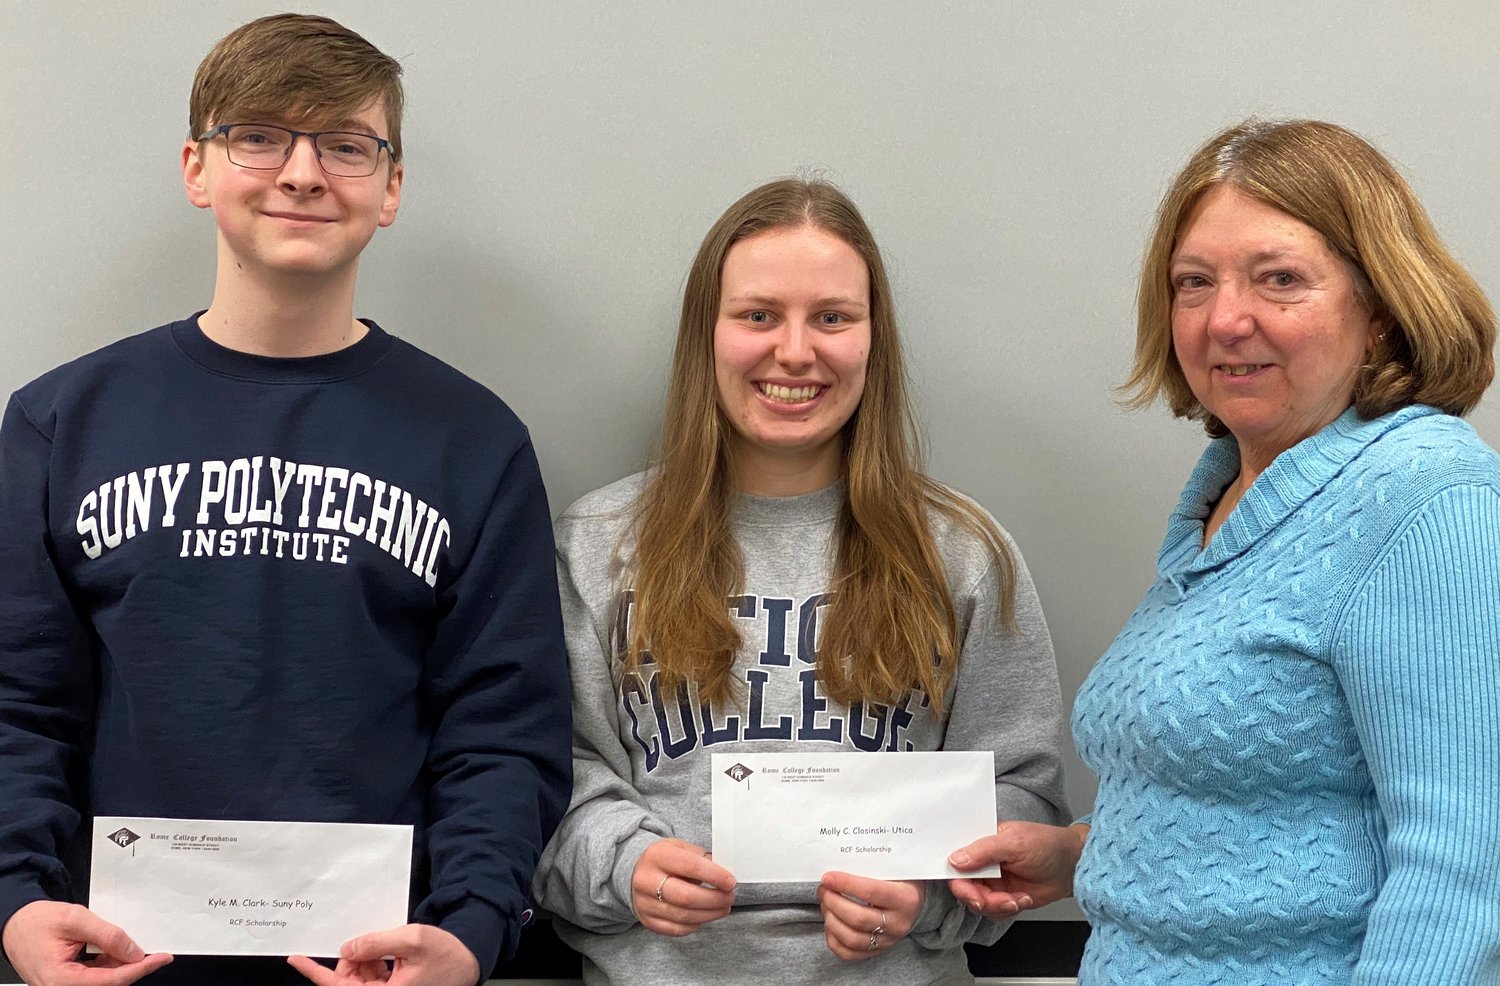 SCHOLARS — College students Kyle Clark, left, and Molly Closinski, center, receive $1,000 scholarships from Rome College Foundation President Suzanne Carvelli, during a presentation ceremony last week.